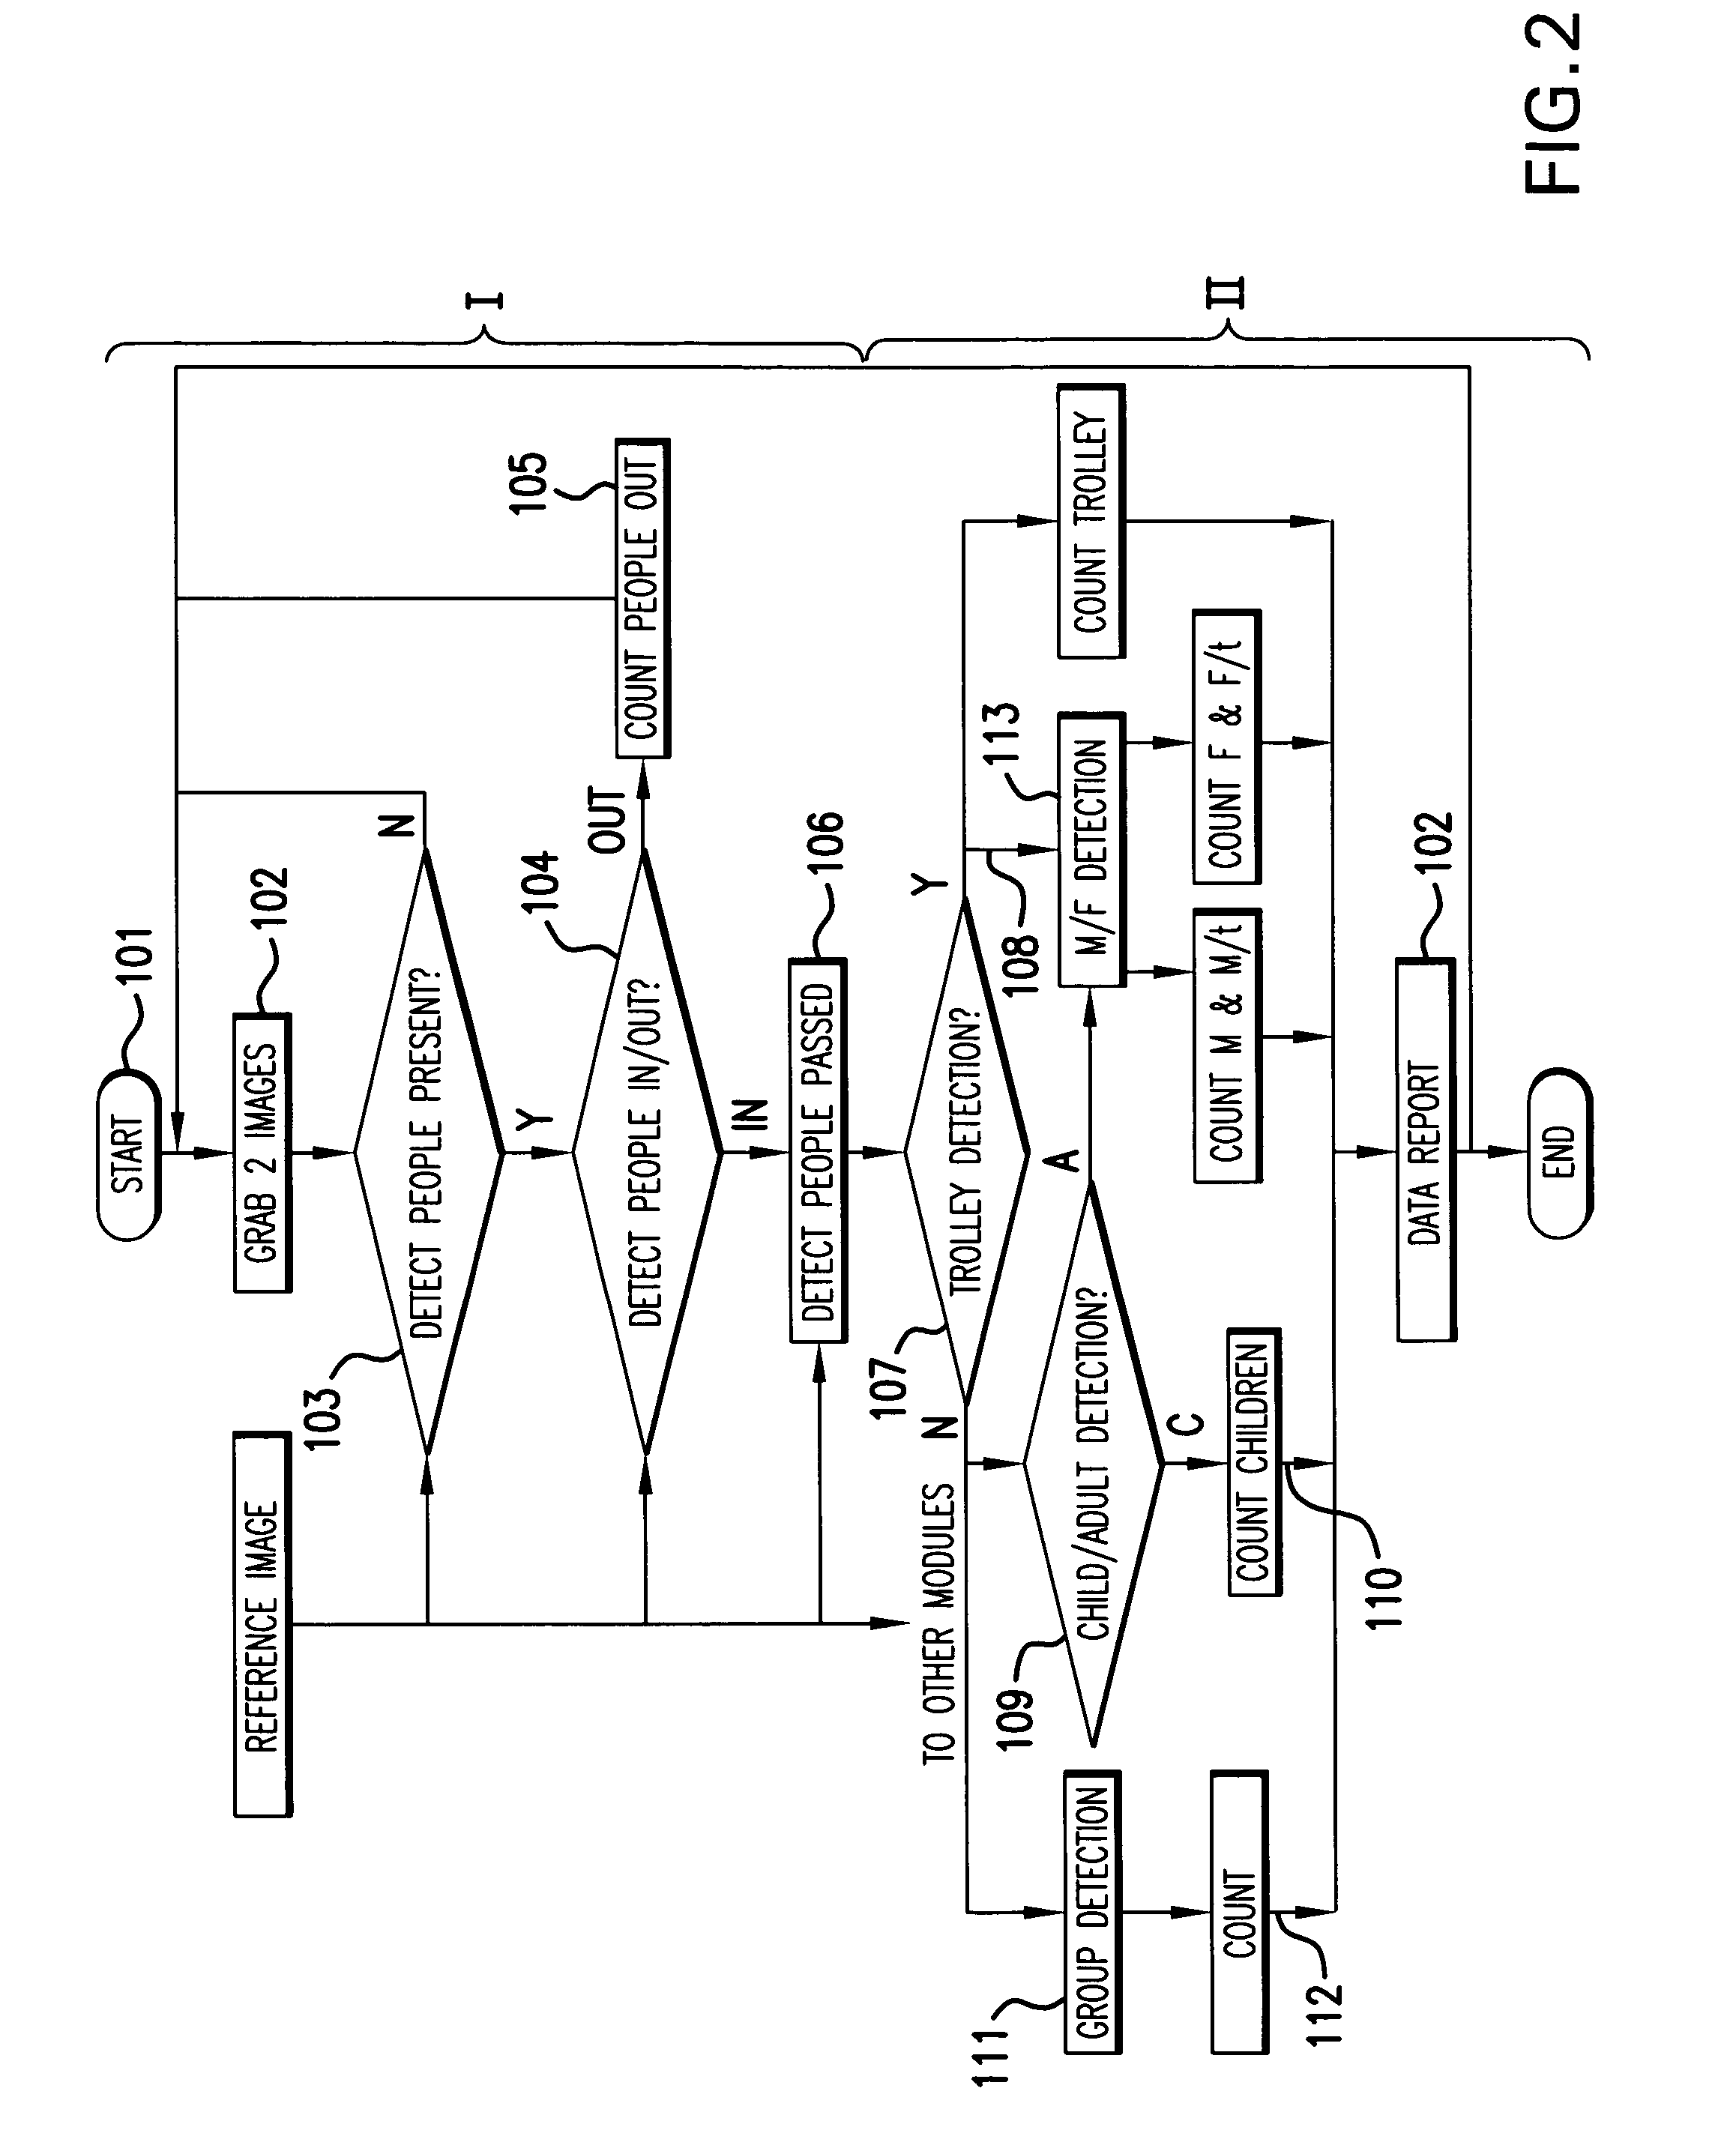 Automatic classification and/or counting system